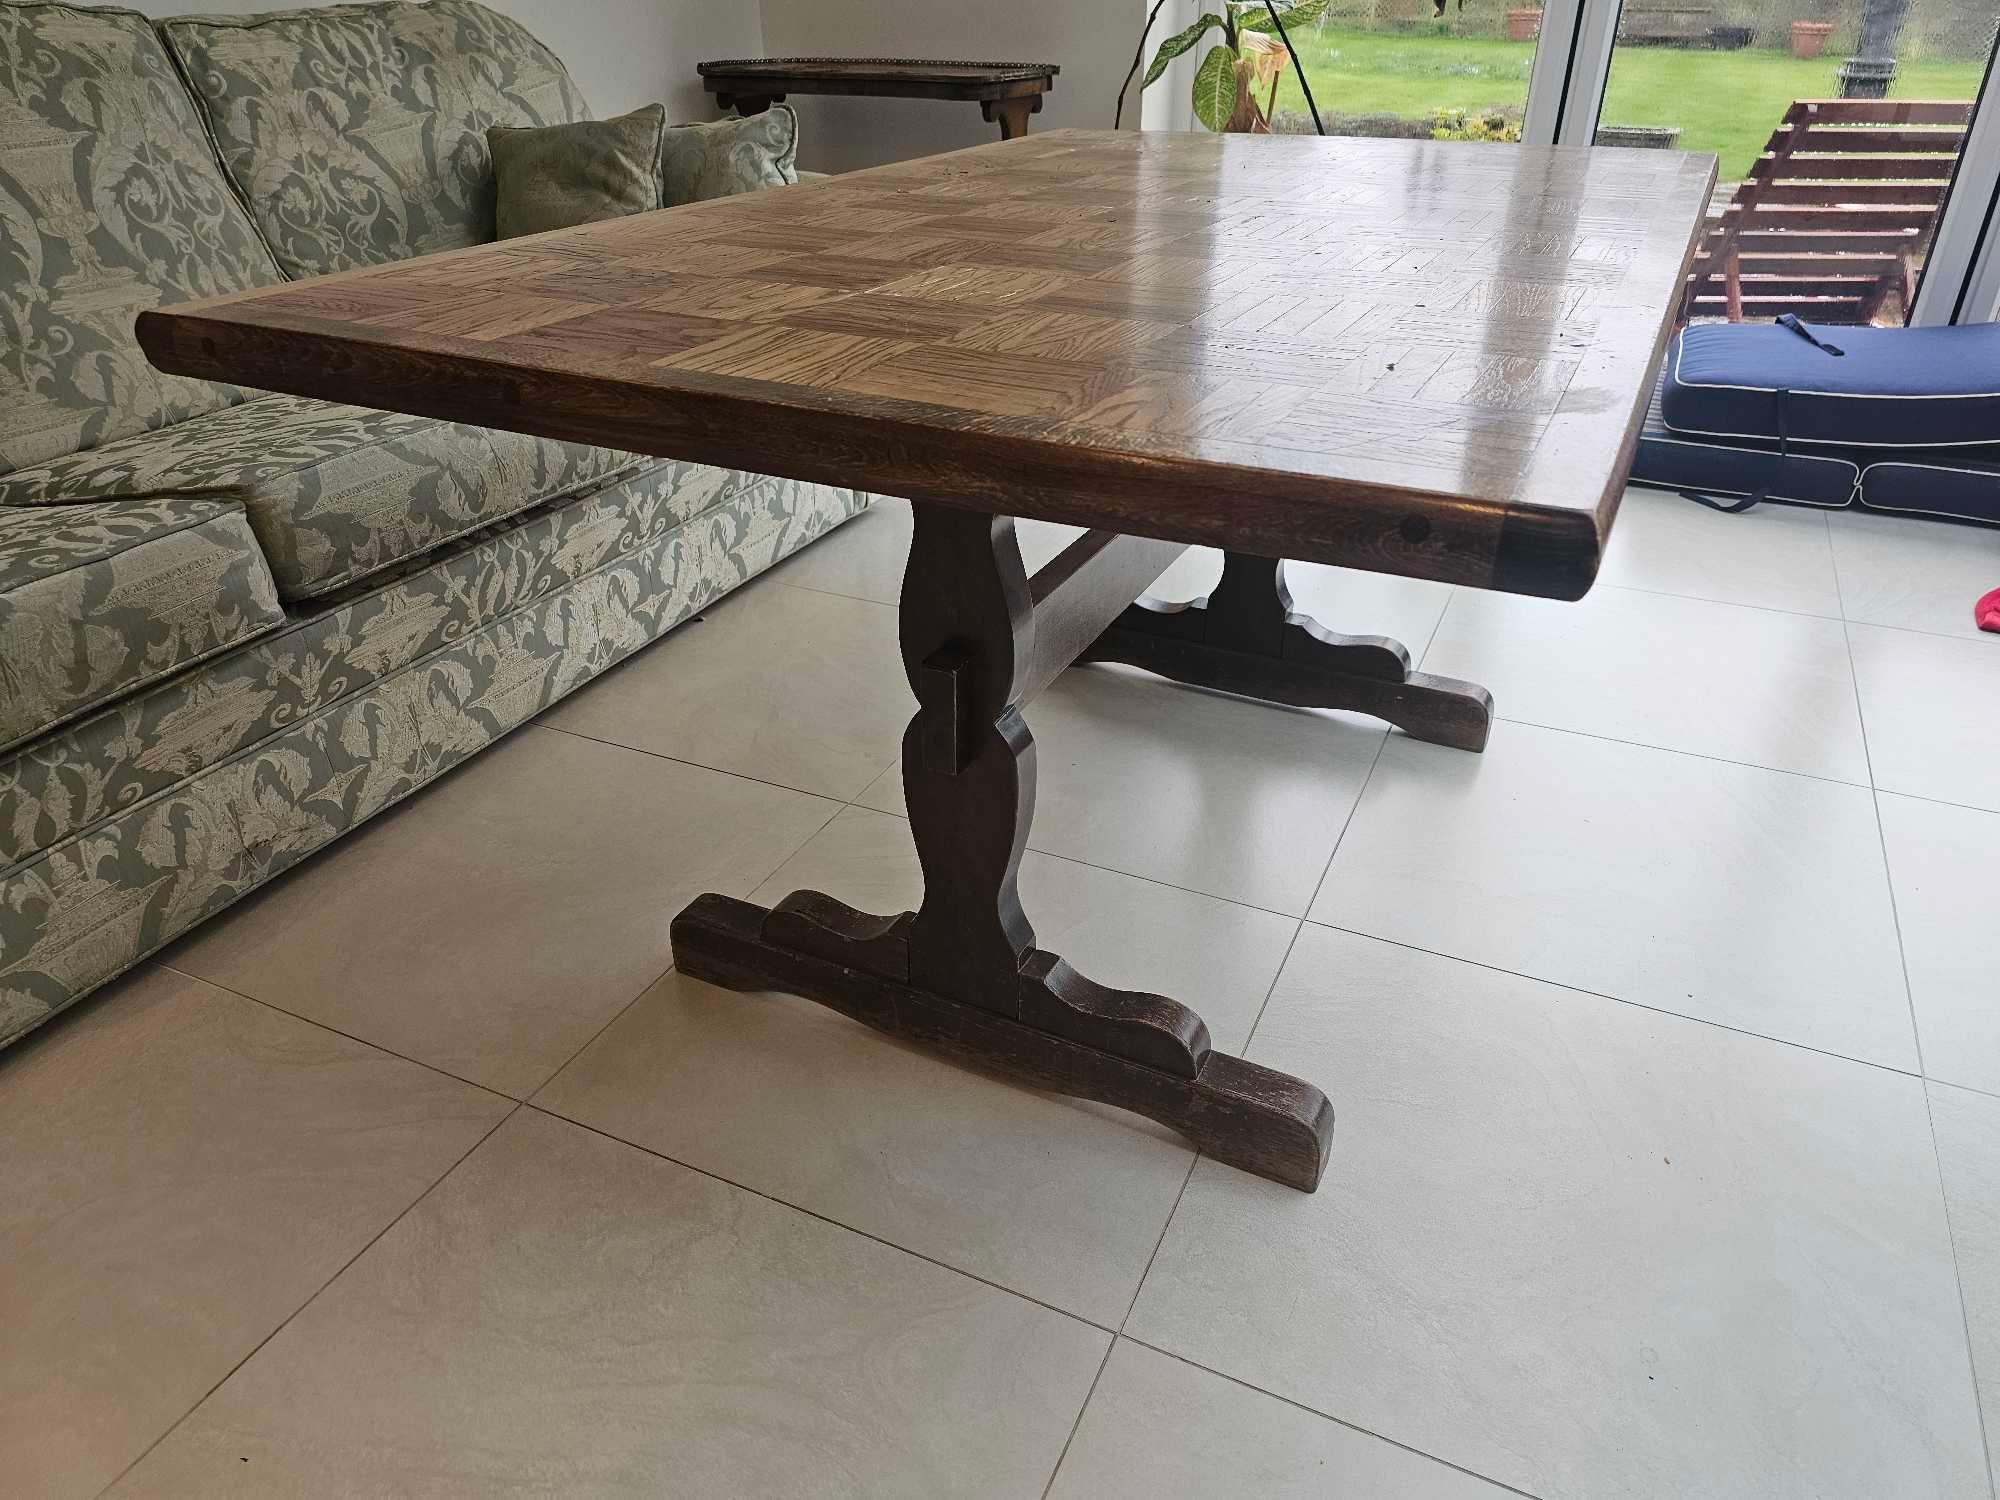 An Oak Trestle Dining Table With Parquetry Lattice Top 150 X 92 X 74cm - Image 3 of 5